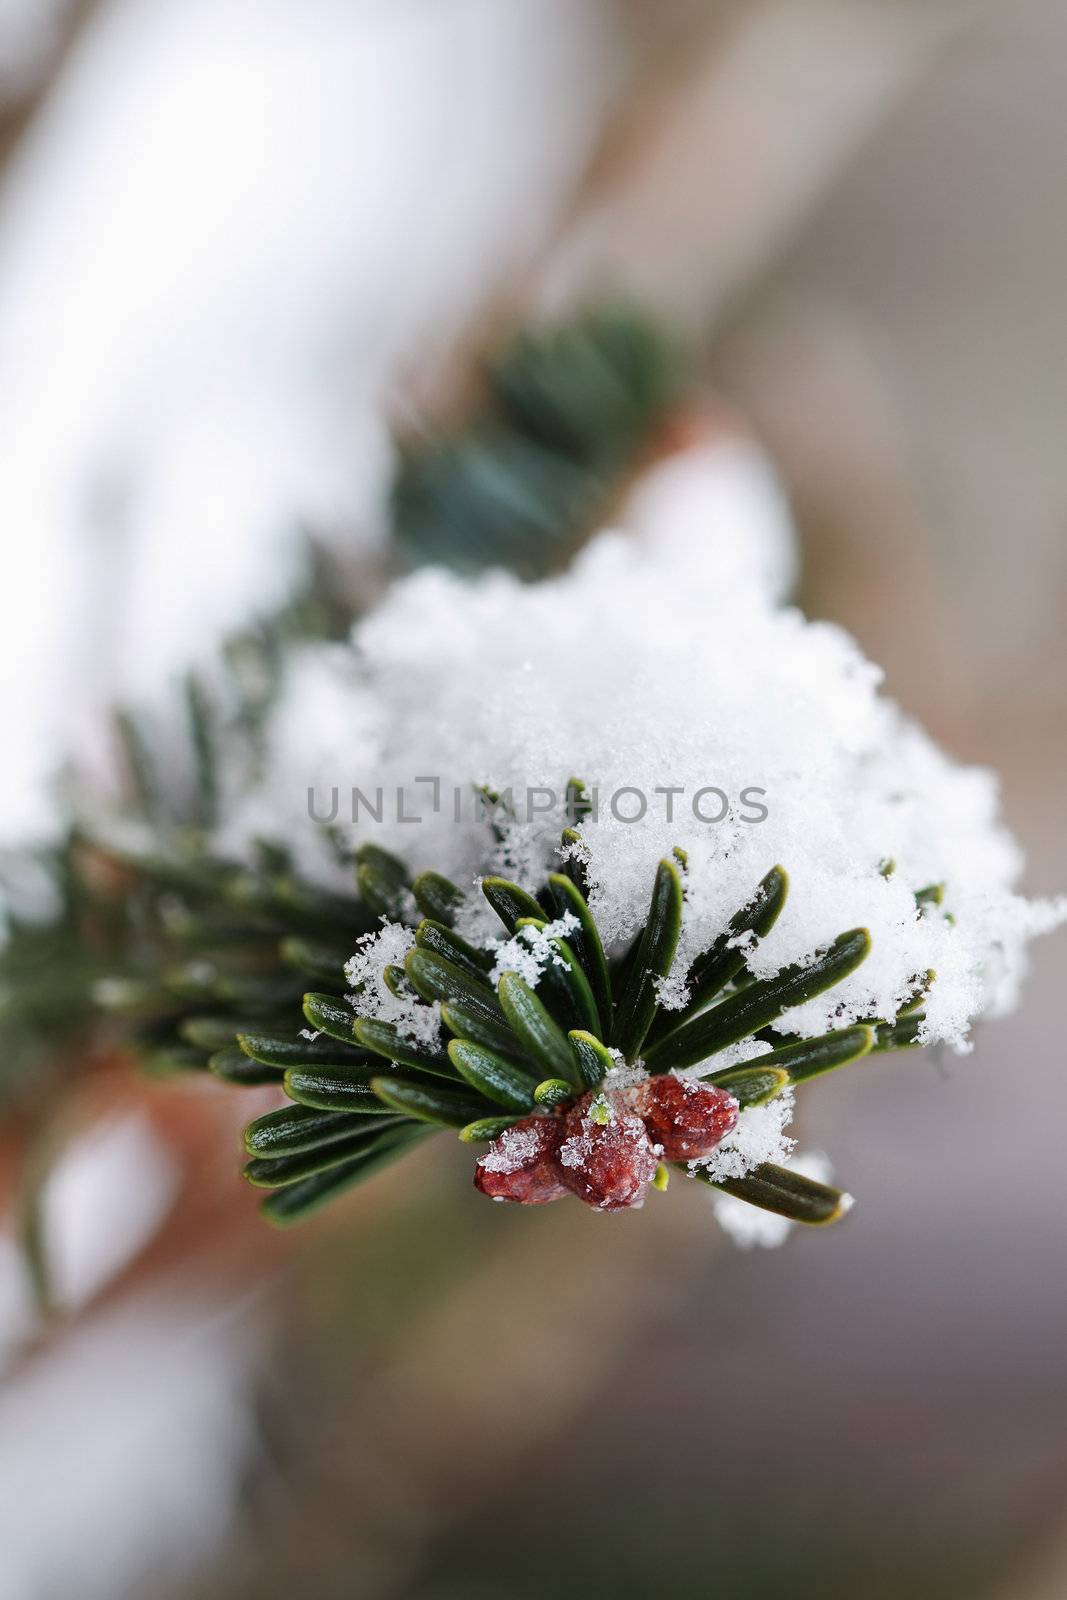 Macro of a pine tree branch with fresh fallen snow. Extreme shallow DOF.